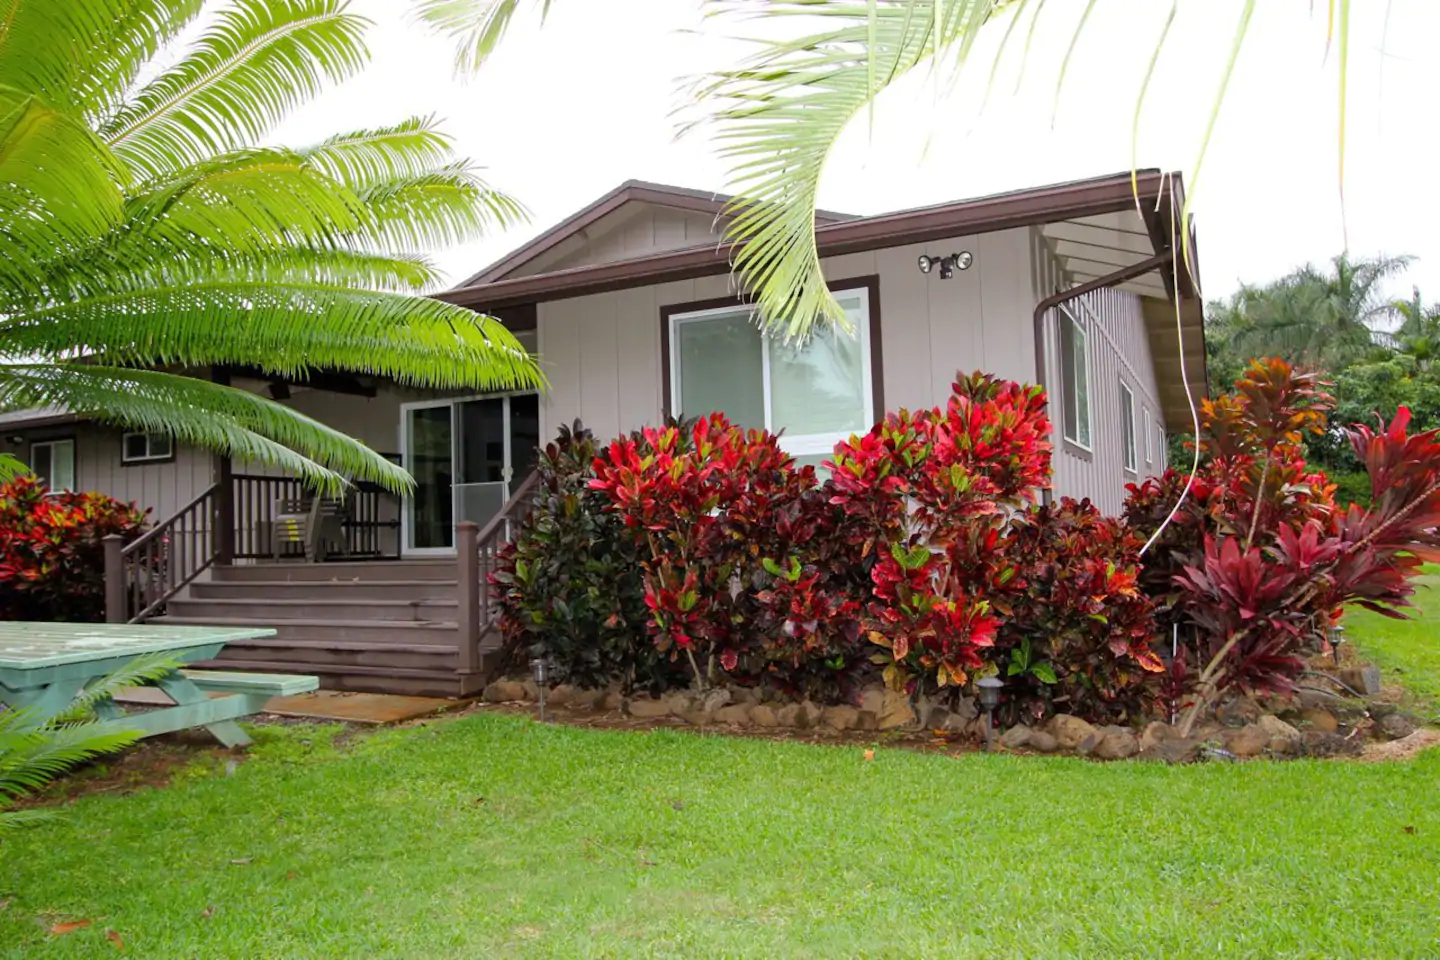 North Shore plantation-style studio, one of the best Airbnbs in Oahu